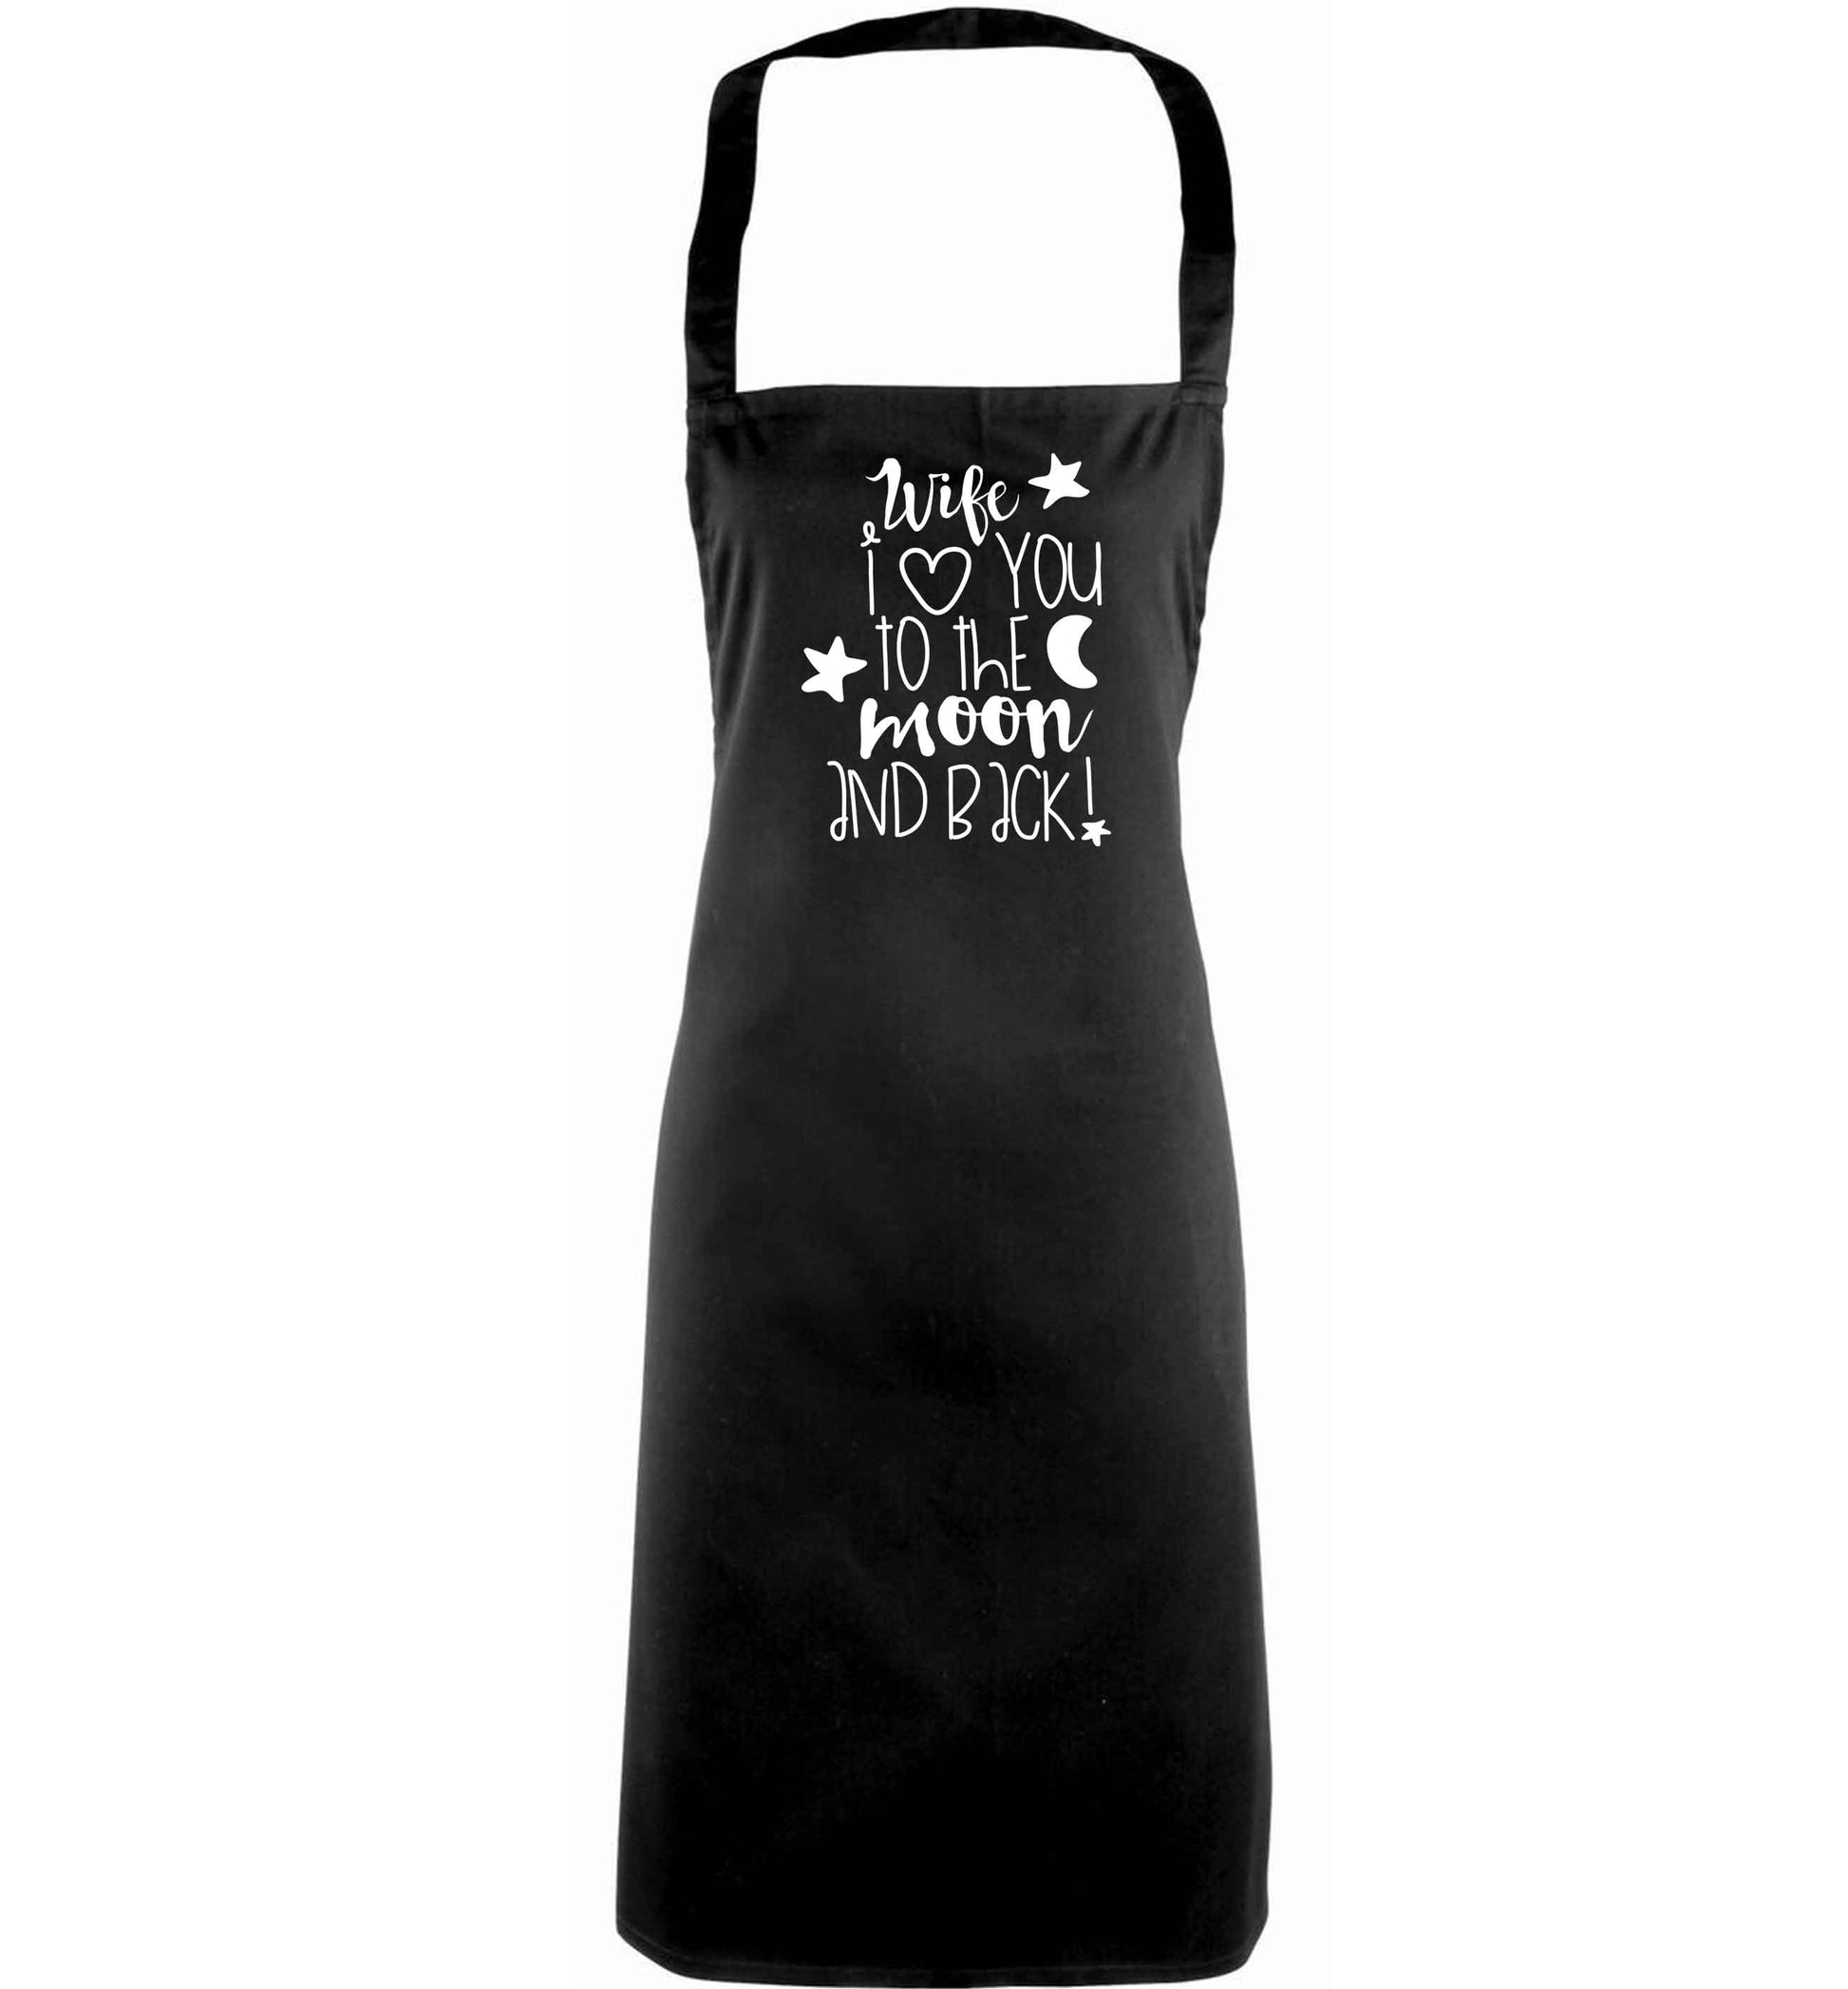 Wife I love you to the moon and back adults black apron